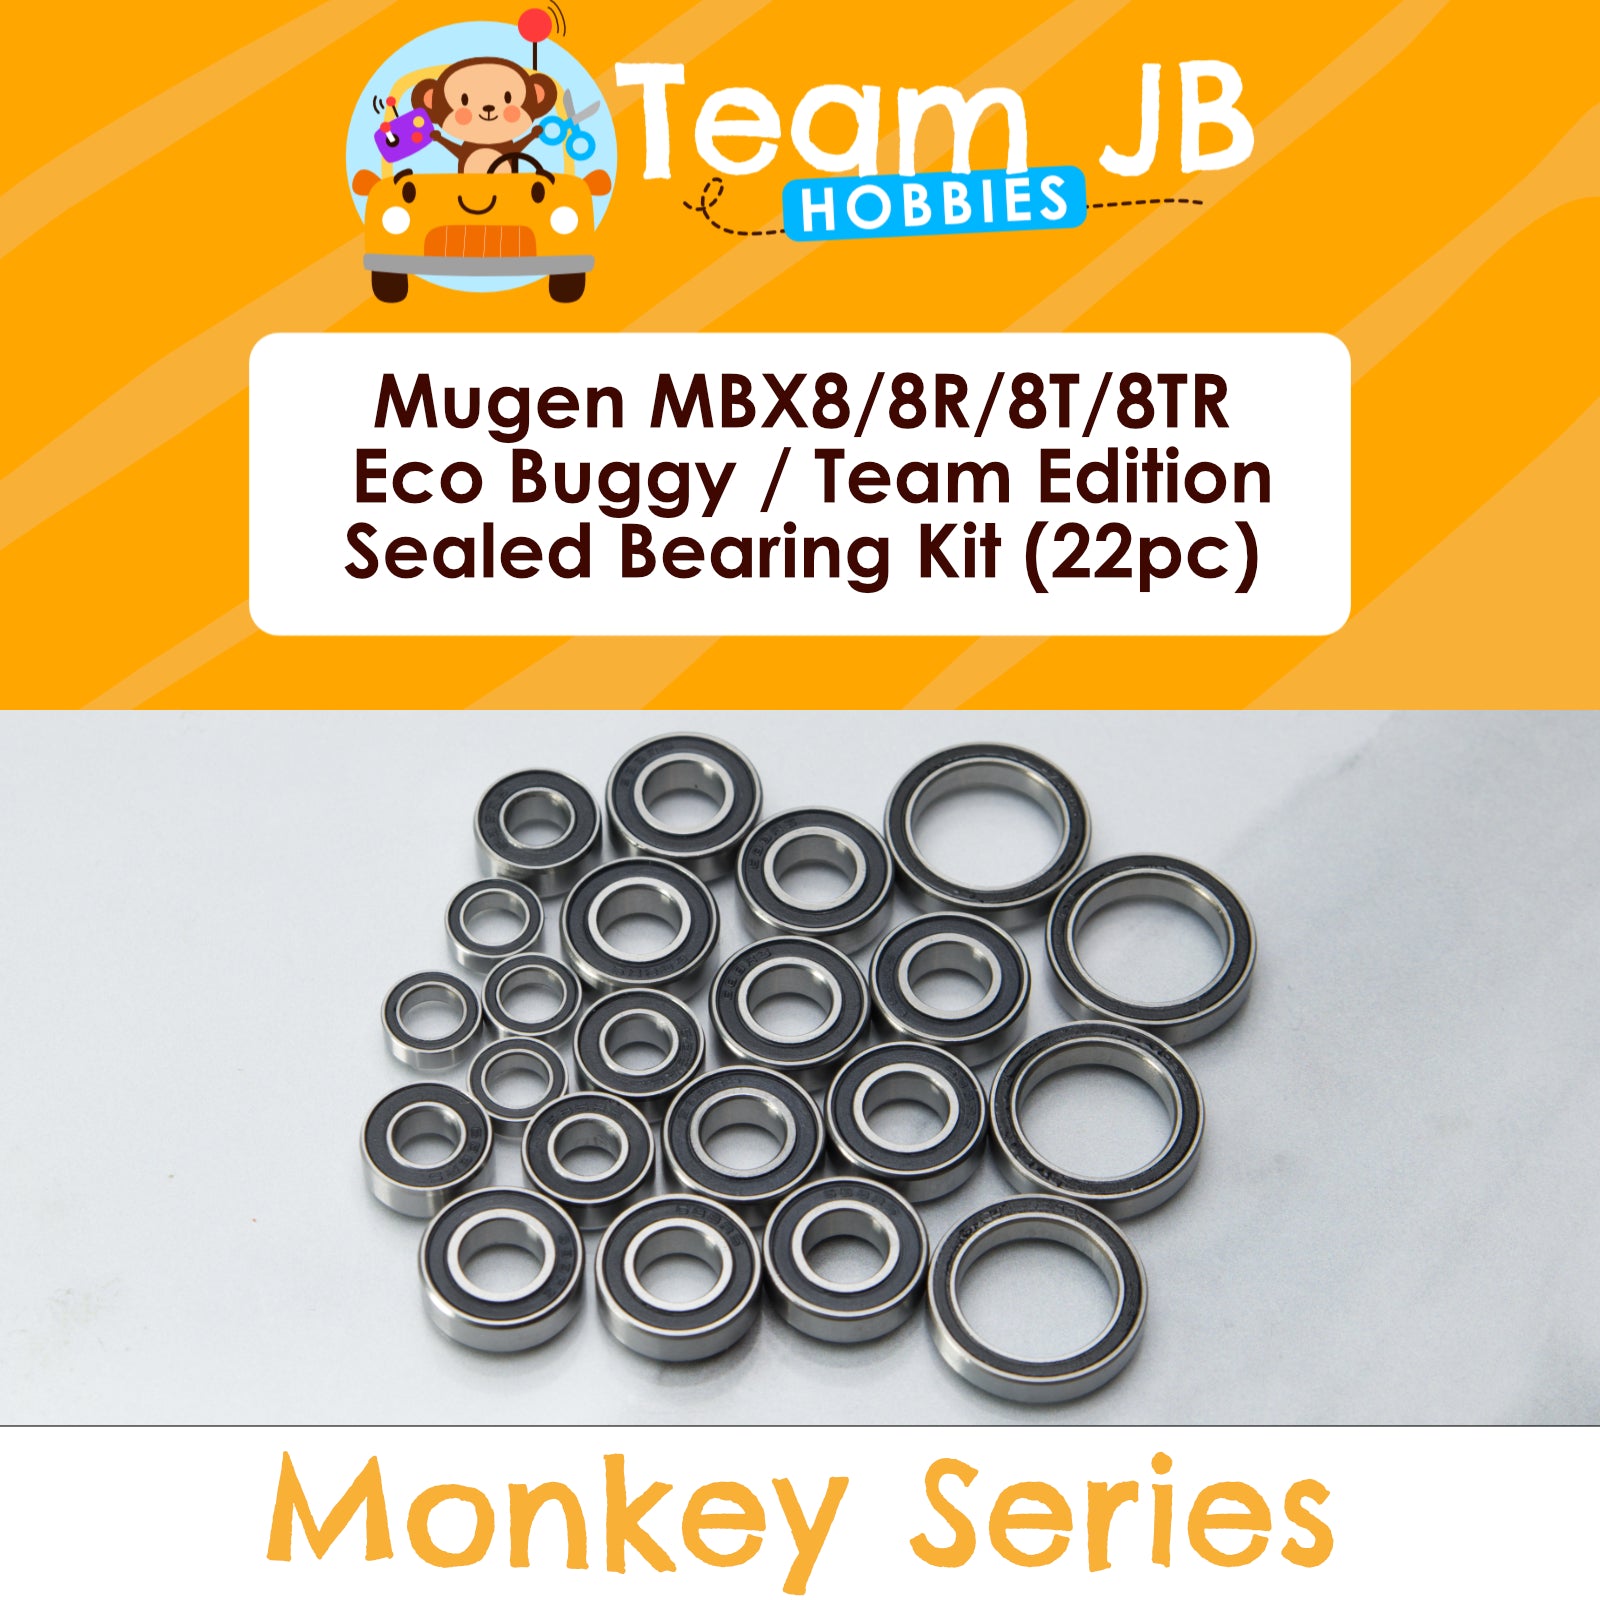 Mugen MBX8/8R/8T/8TR Eco Buggy / Team Edition  - Sealed Bearing Kit